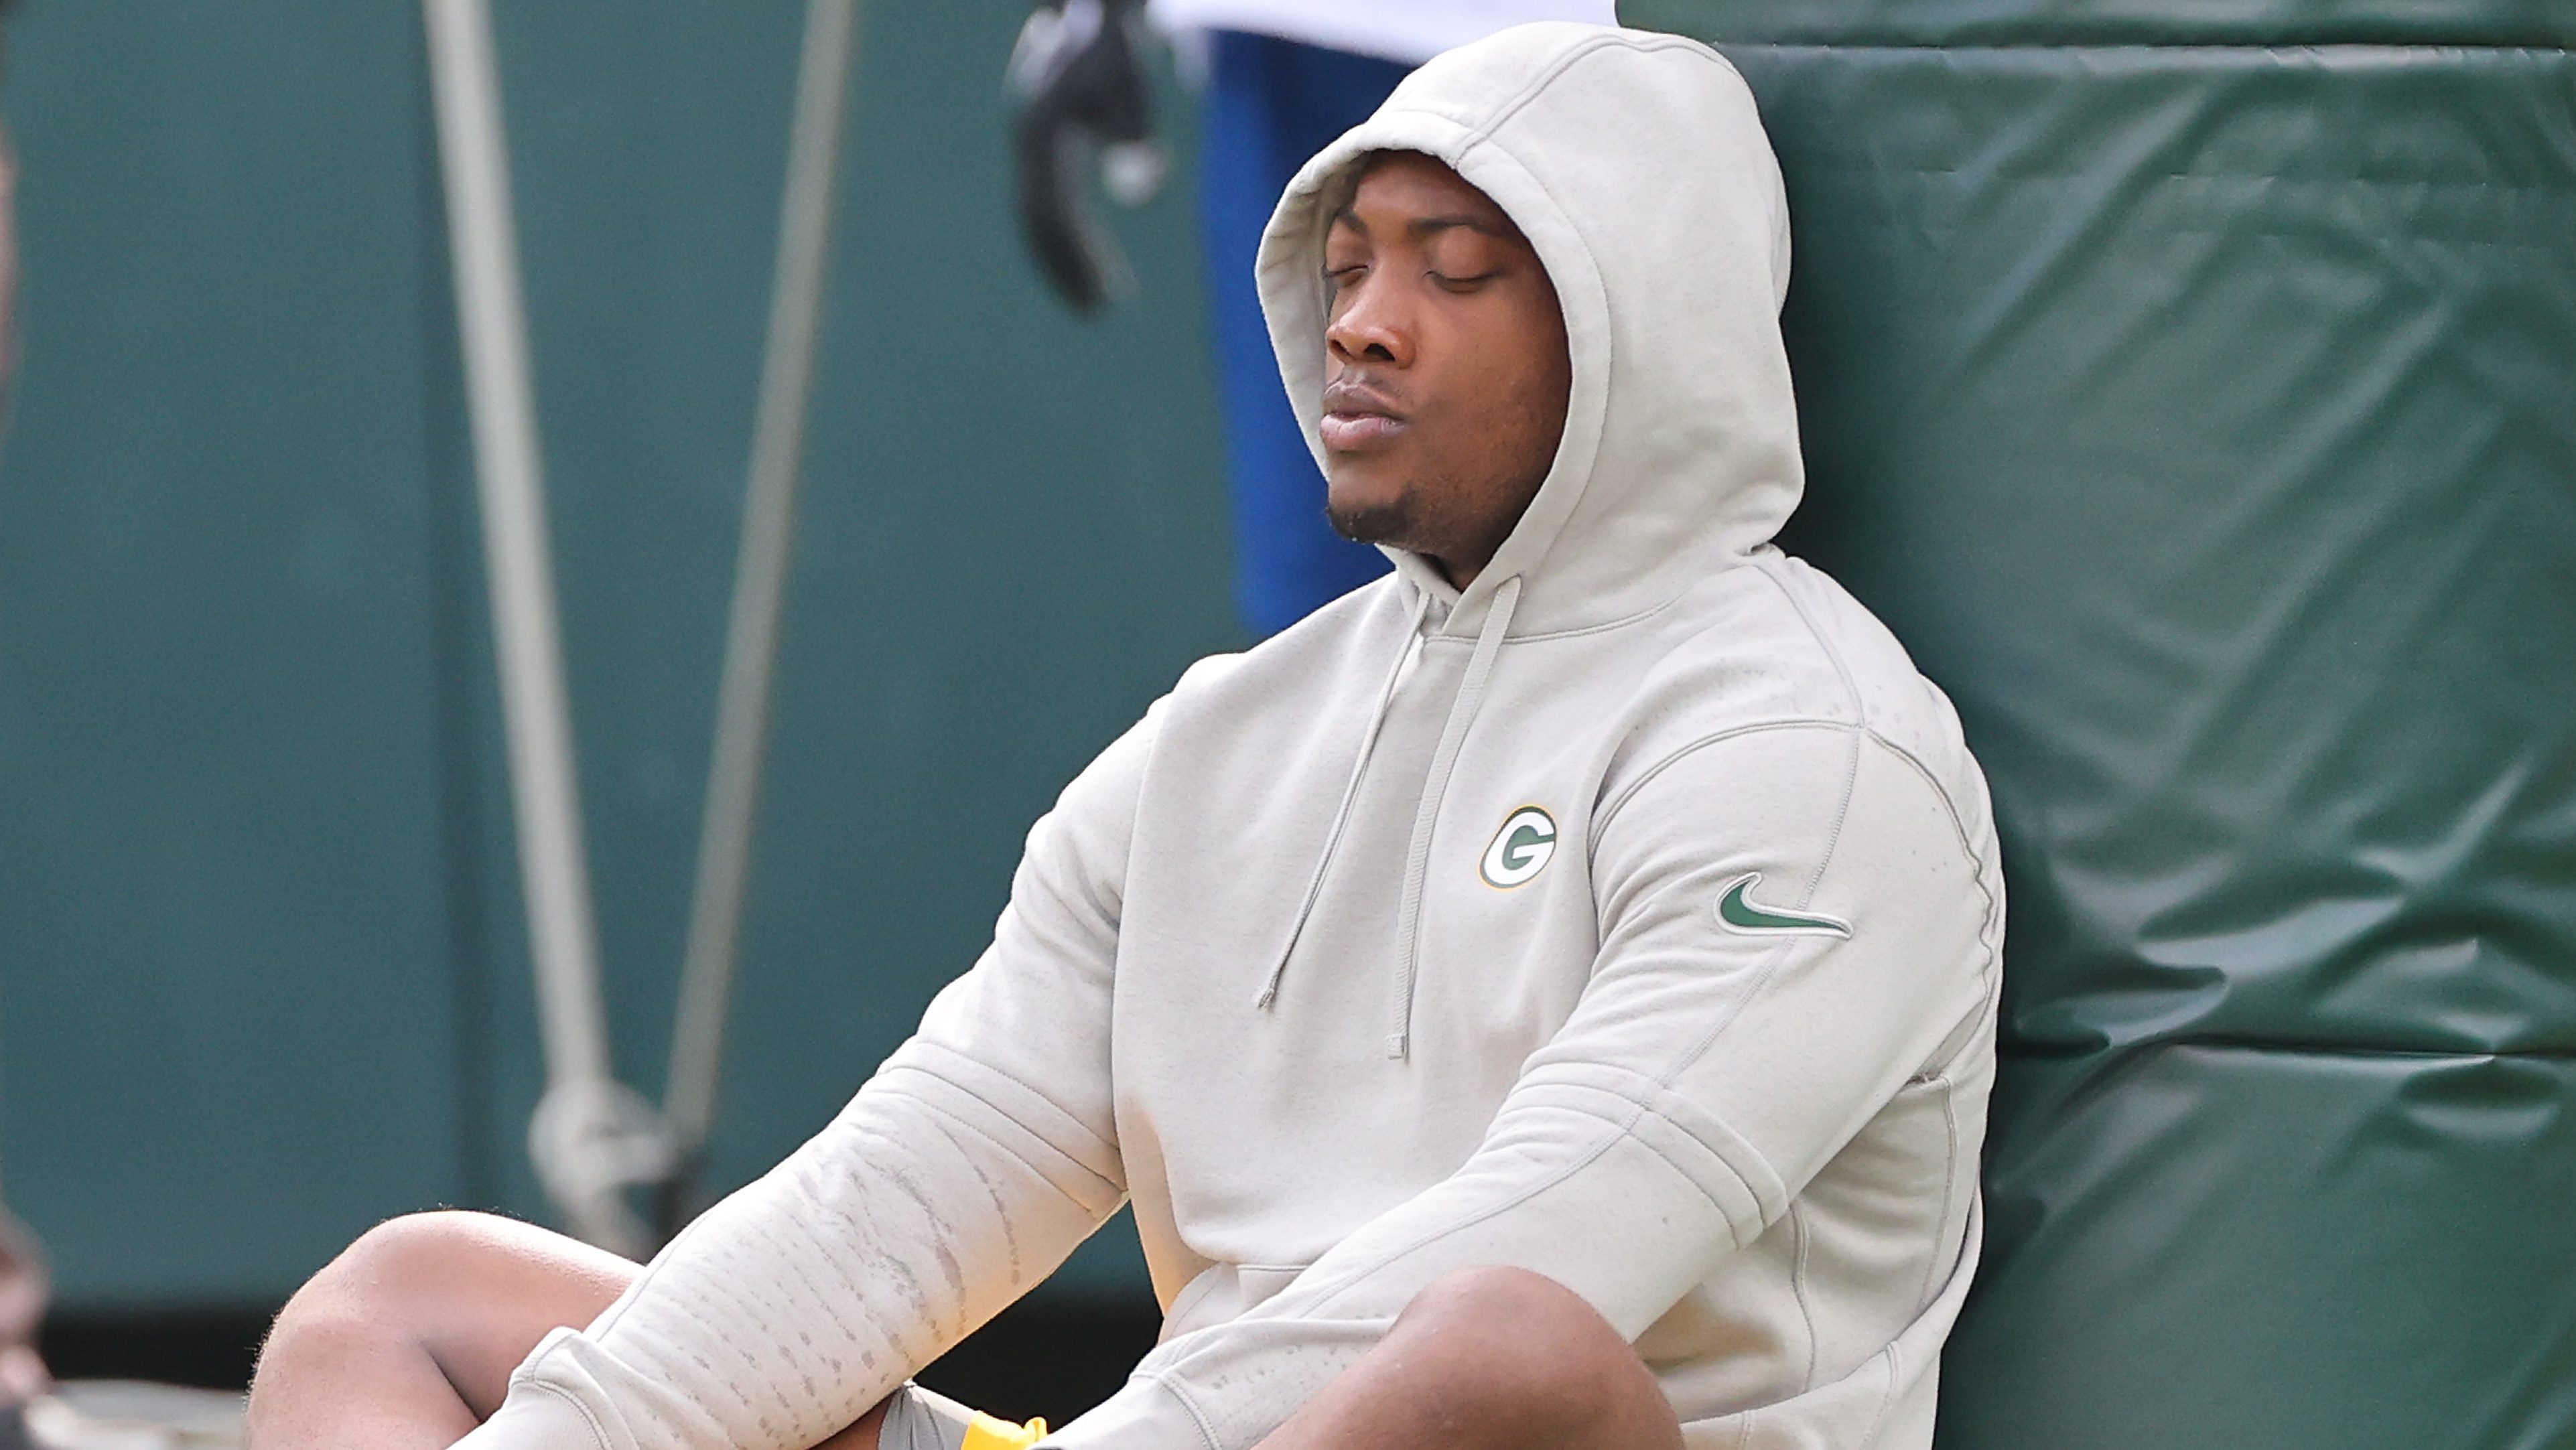 Quay Walker Returns to Social Media With Odd Request for Green Bay
Residents